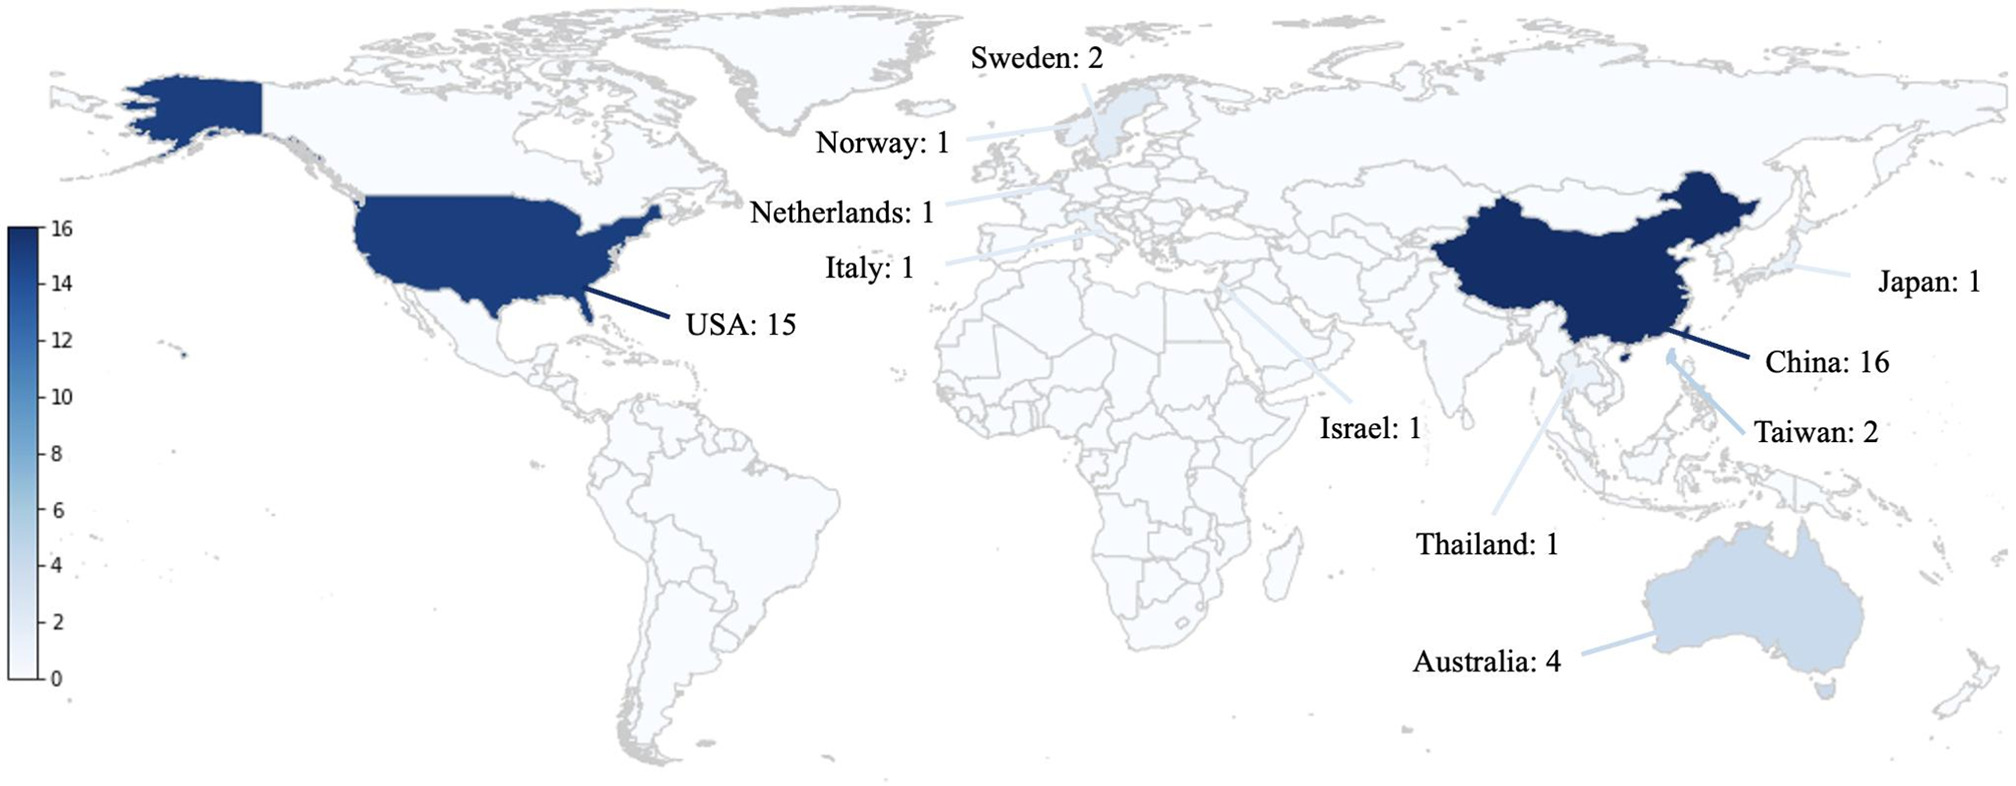 Fig. 2 
            World map showing the distribution of the included studies consisting of 44 development studies and one external validation study (from the USA). Of the developmental studies, four also performed external validation (three from the USA and one from Israel).
          